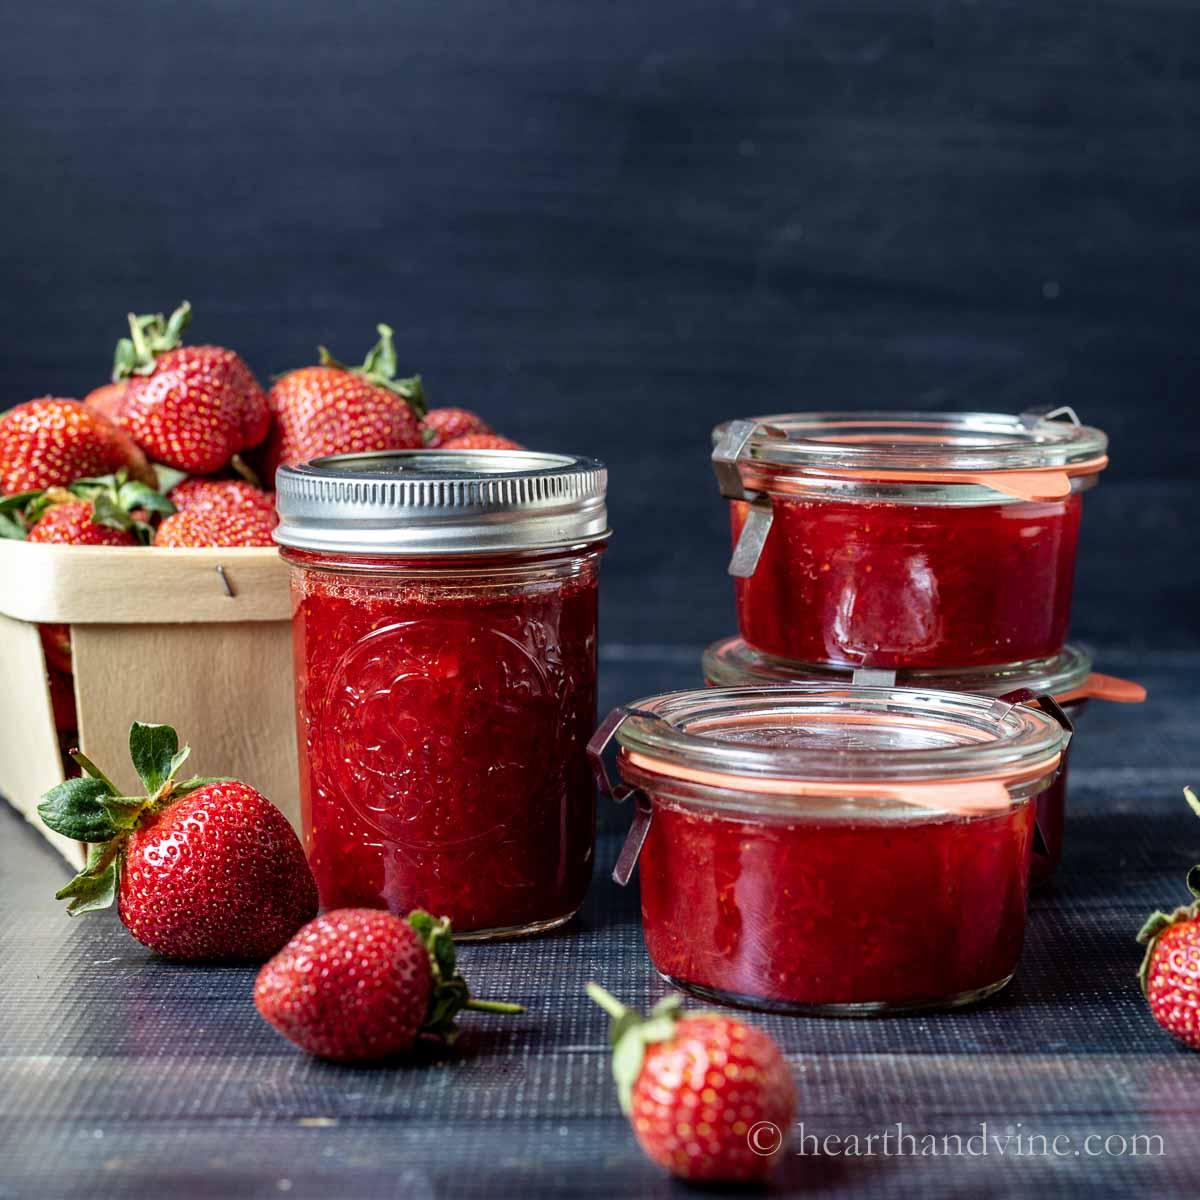 Jars of strawberry jam surrounded by fresh strawberries and a pint of berries.